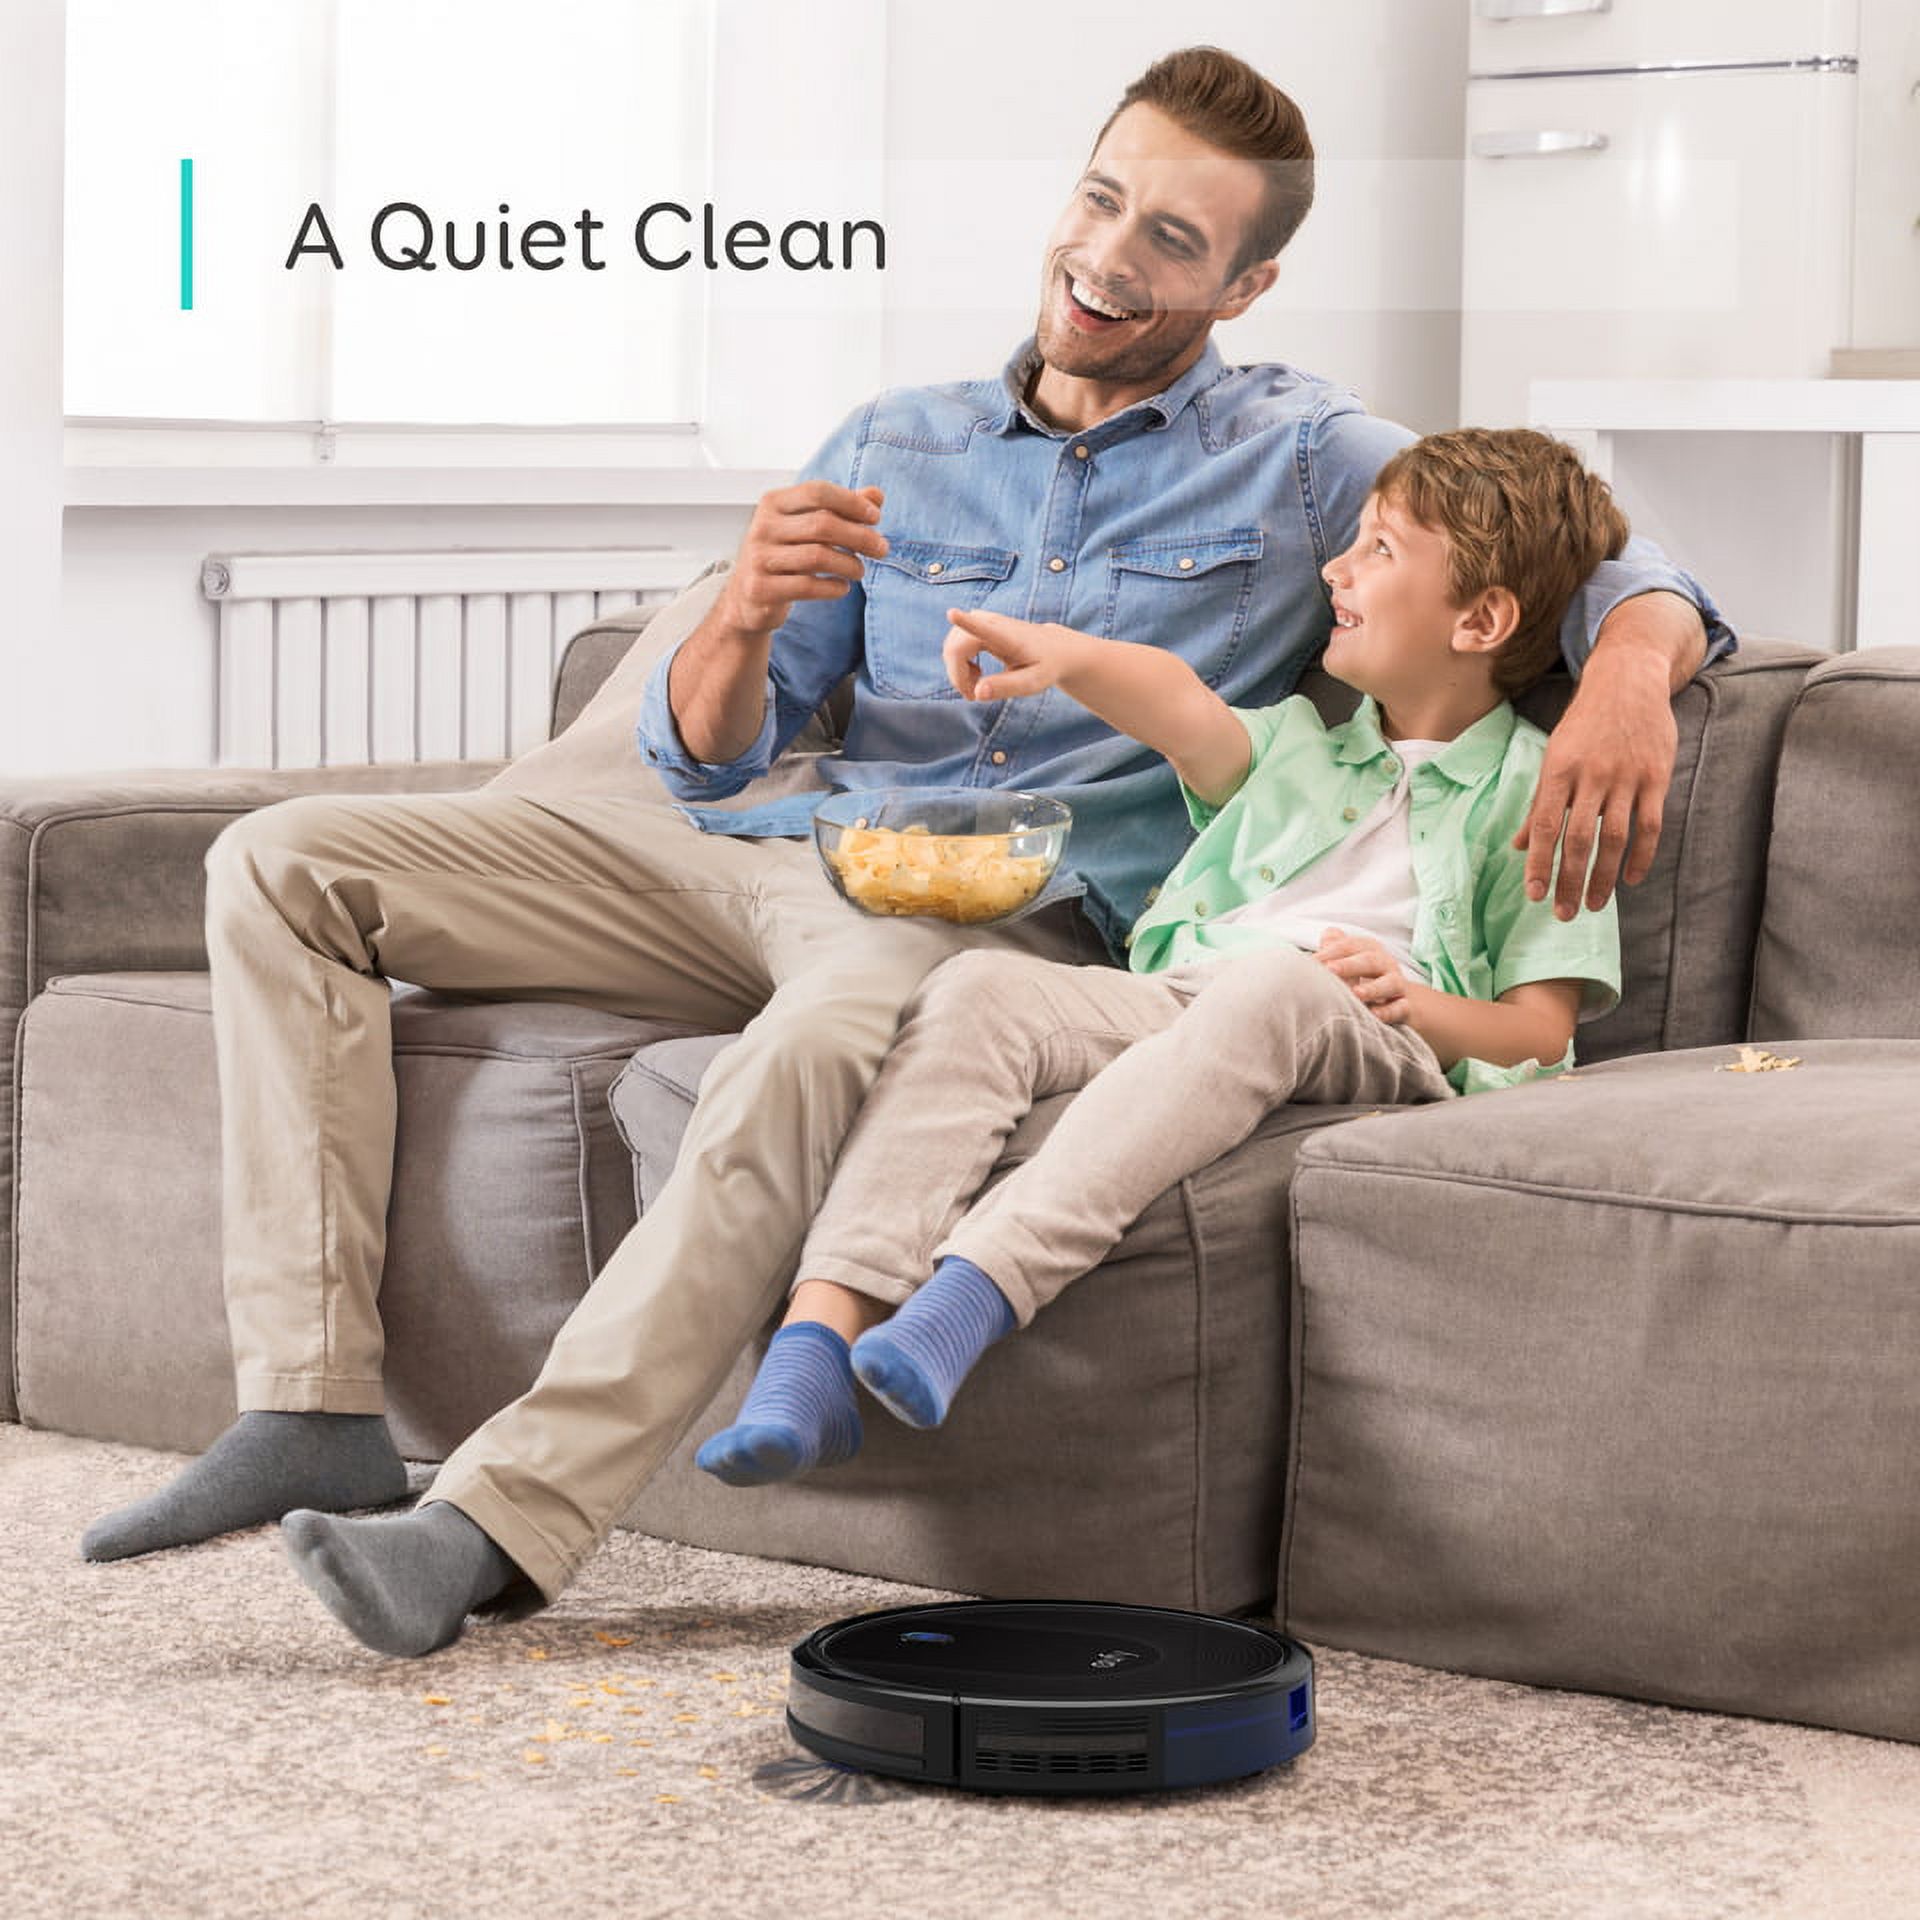 eufy BoostIQ RoboVac 30, Robot Vacuum Cleaner, Upgraded, Super-Thin, 1500Pa Strong Suction, 13ft Boundary Strips Included, Quiet, Self-Charging, Cleans Hard Floors to Medium-Pile Carpets - image 5 of 7